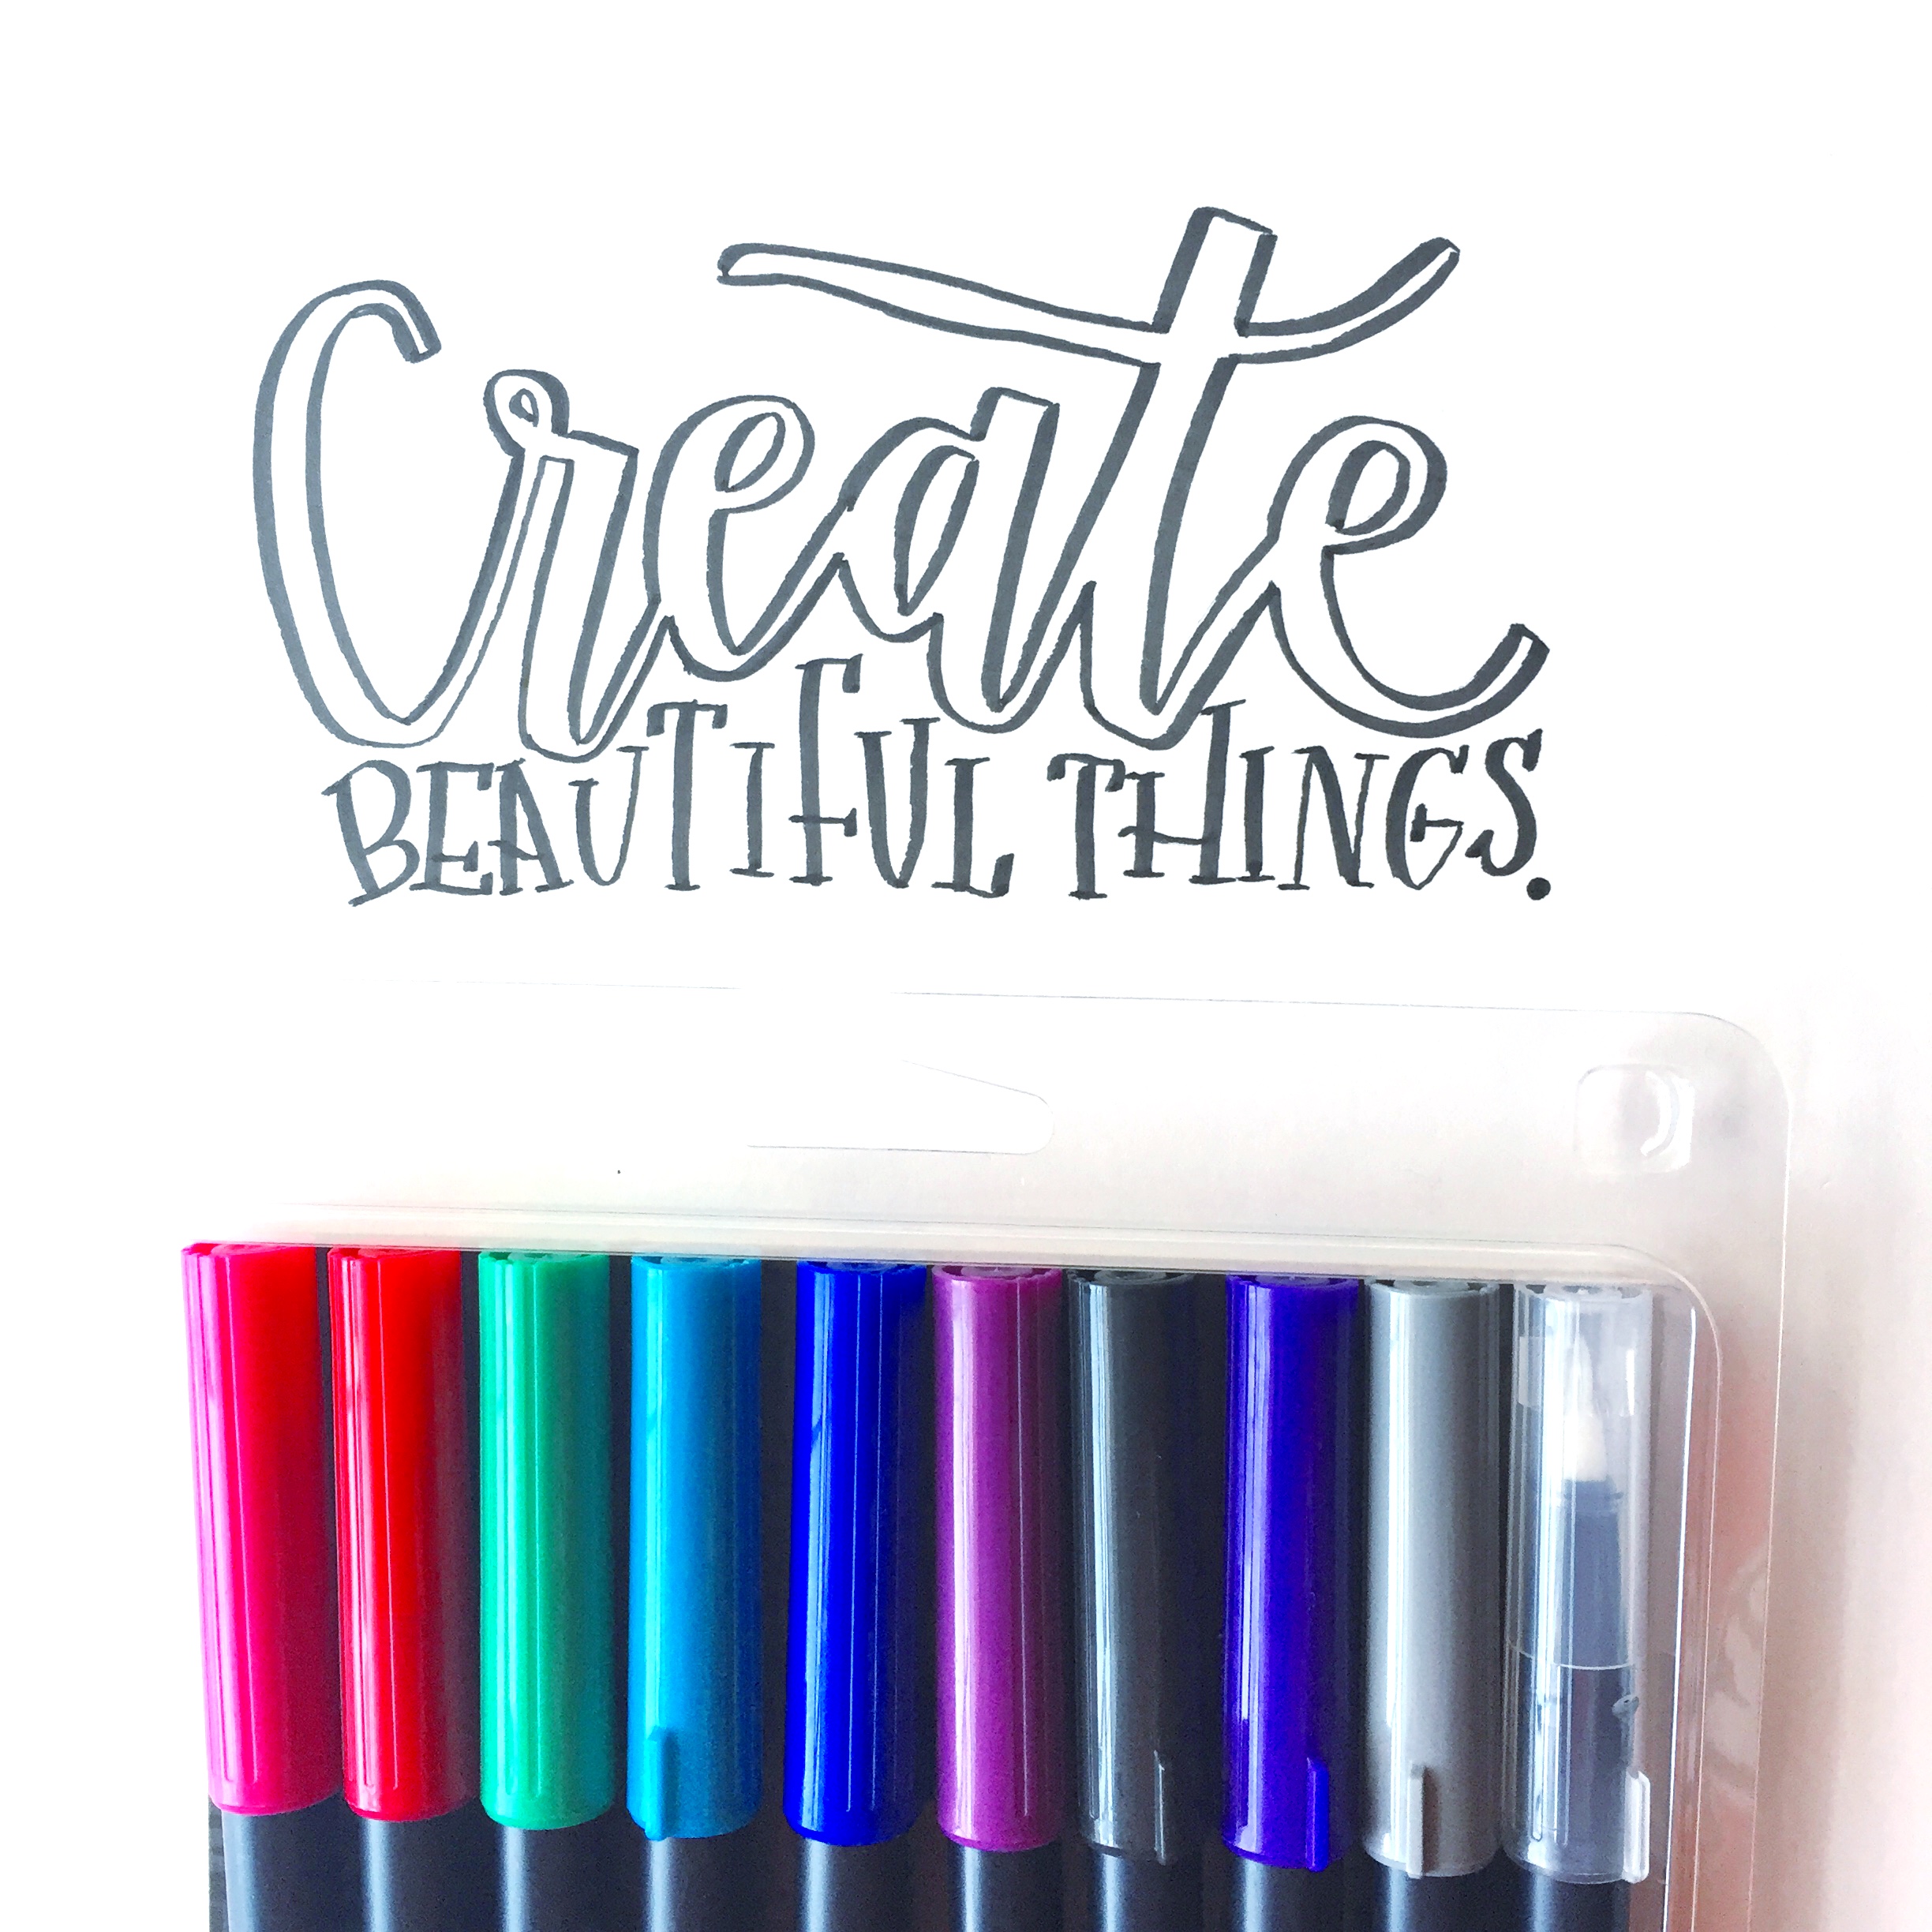 Lauren Fitzmaurice of @renmadcalligraphy gives you tips and tricks on how to create fun patterned lettering using the new Tombow Dual Brush Pen Galaxy and Pastel Palettes. For more tips and tricks, check out renmadecalligraphy.com.